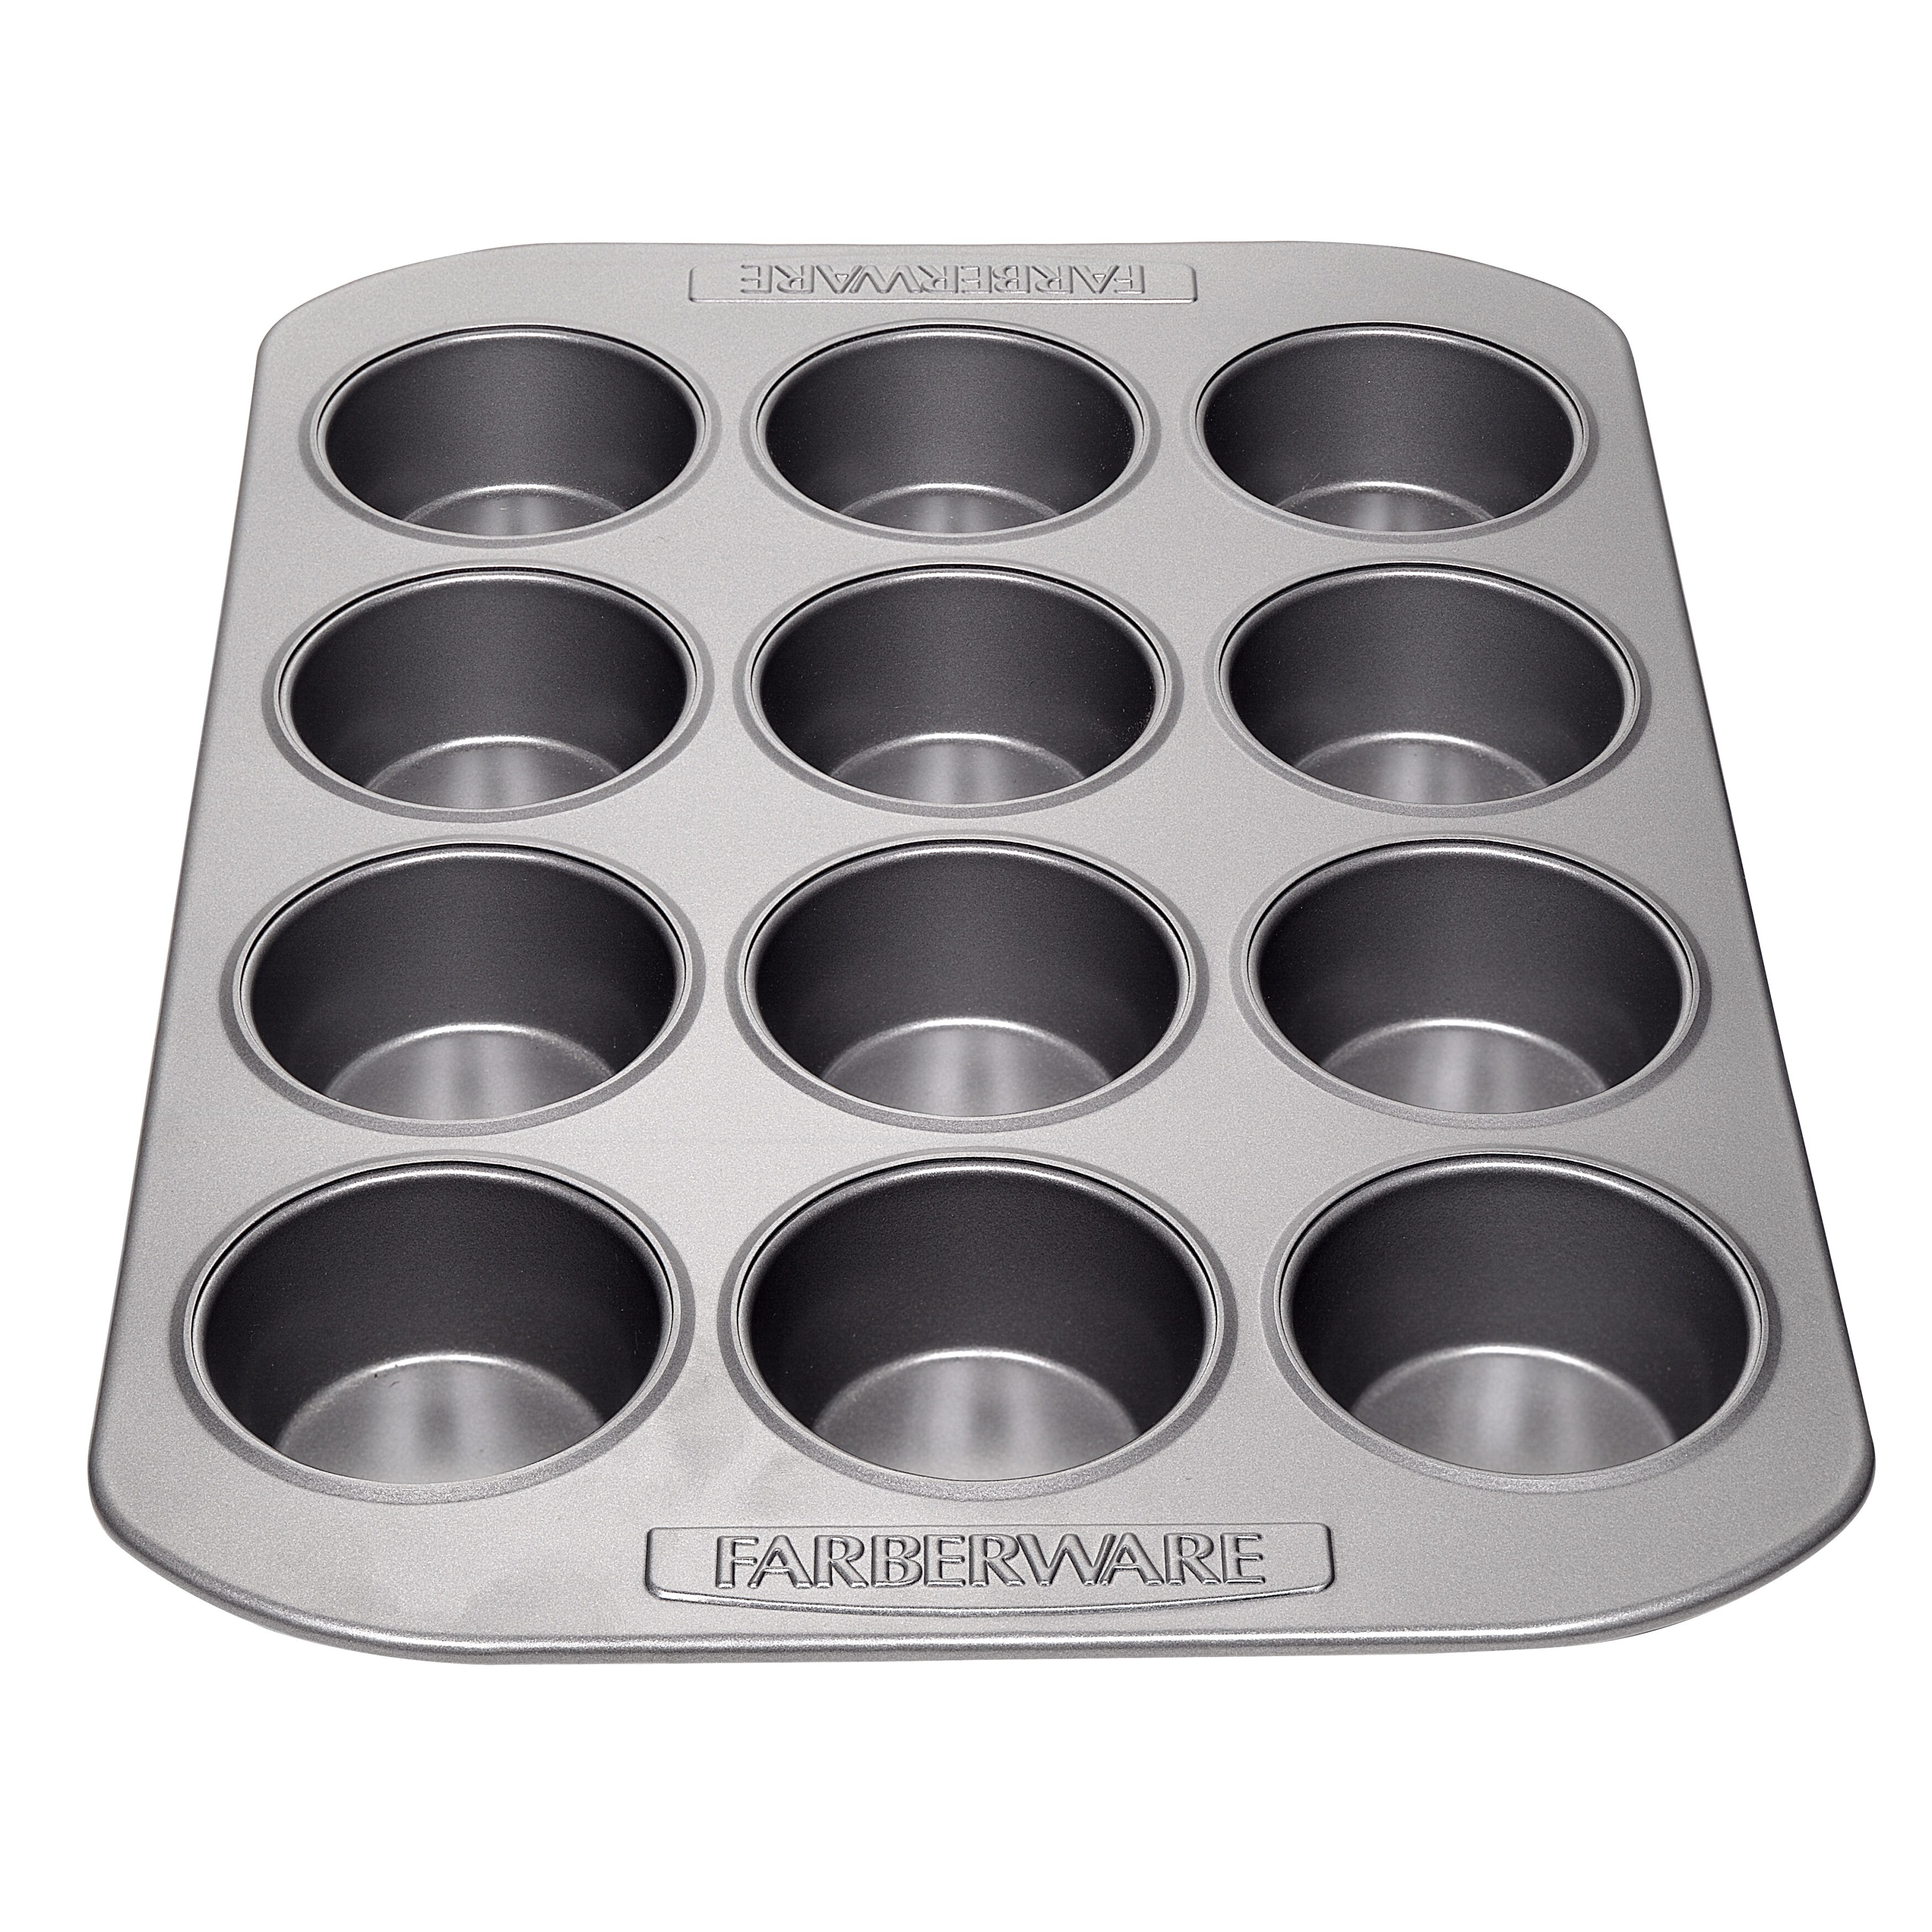 NutriChef Non-stick Carbon Steel Muffin Pans - Pair of Cupcake Cookie Sheet  Pan Style for Baking, Professional Kitchen Muffin Bake Pans, 2 pc. Muffin